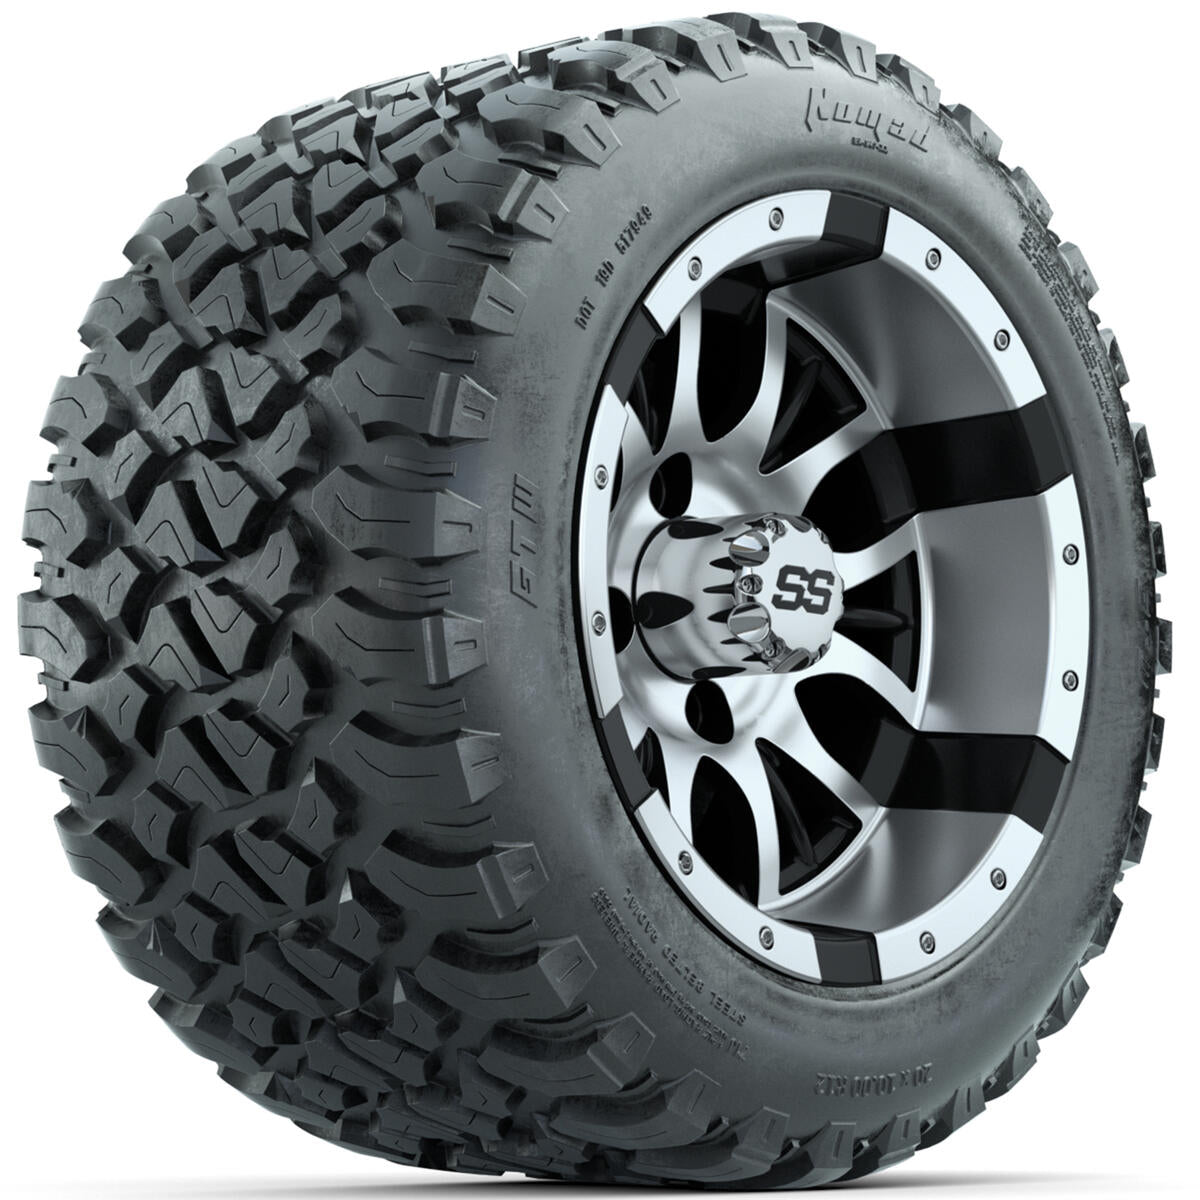 Set of 4 12"in GTW Diesel Wheels with 20x10-R12"GTW Nomad All-Terrain Tires A19-732